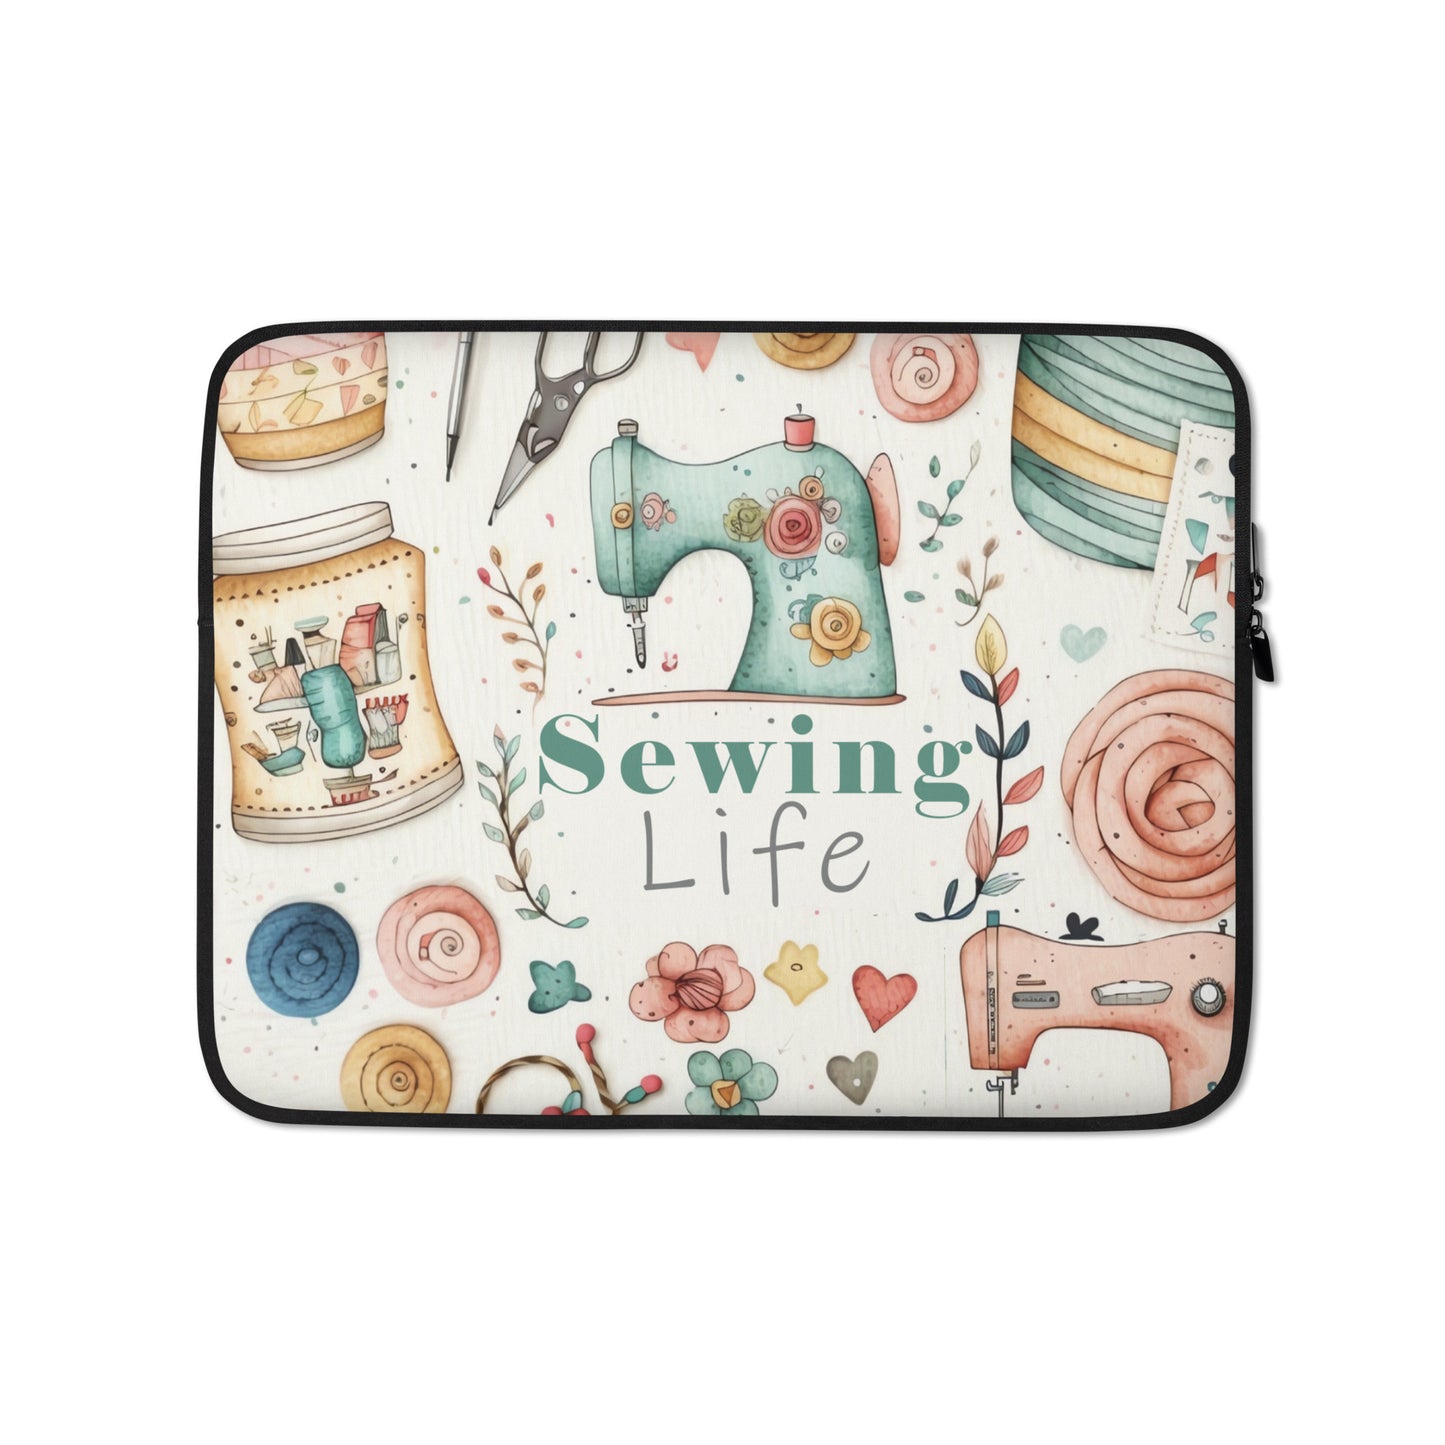 Sewing Life Laptop/Ipad Cover Sleeve CedarHill Country Market